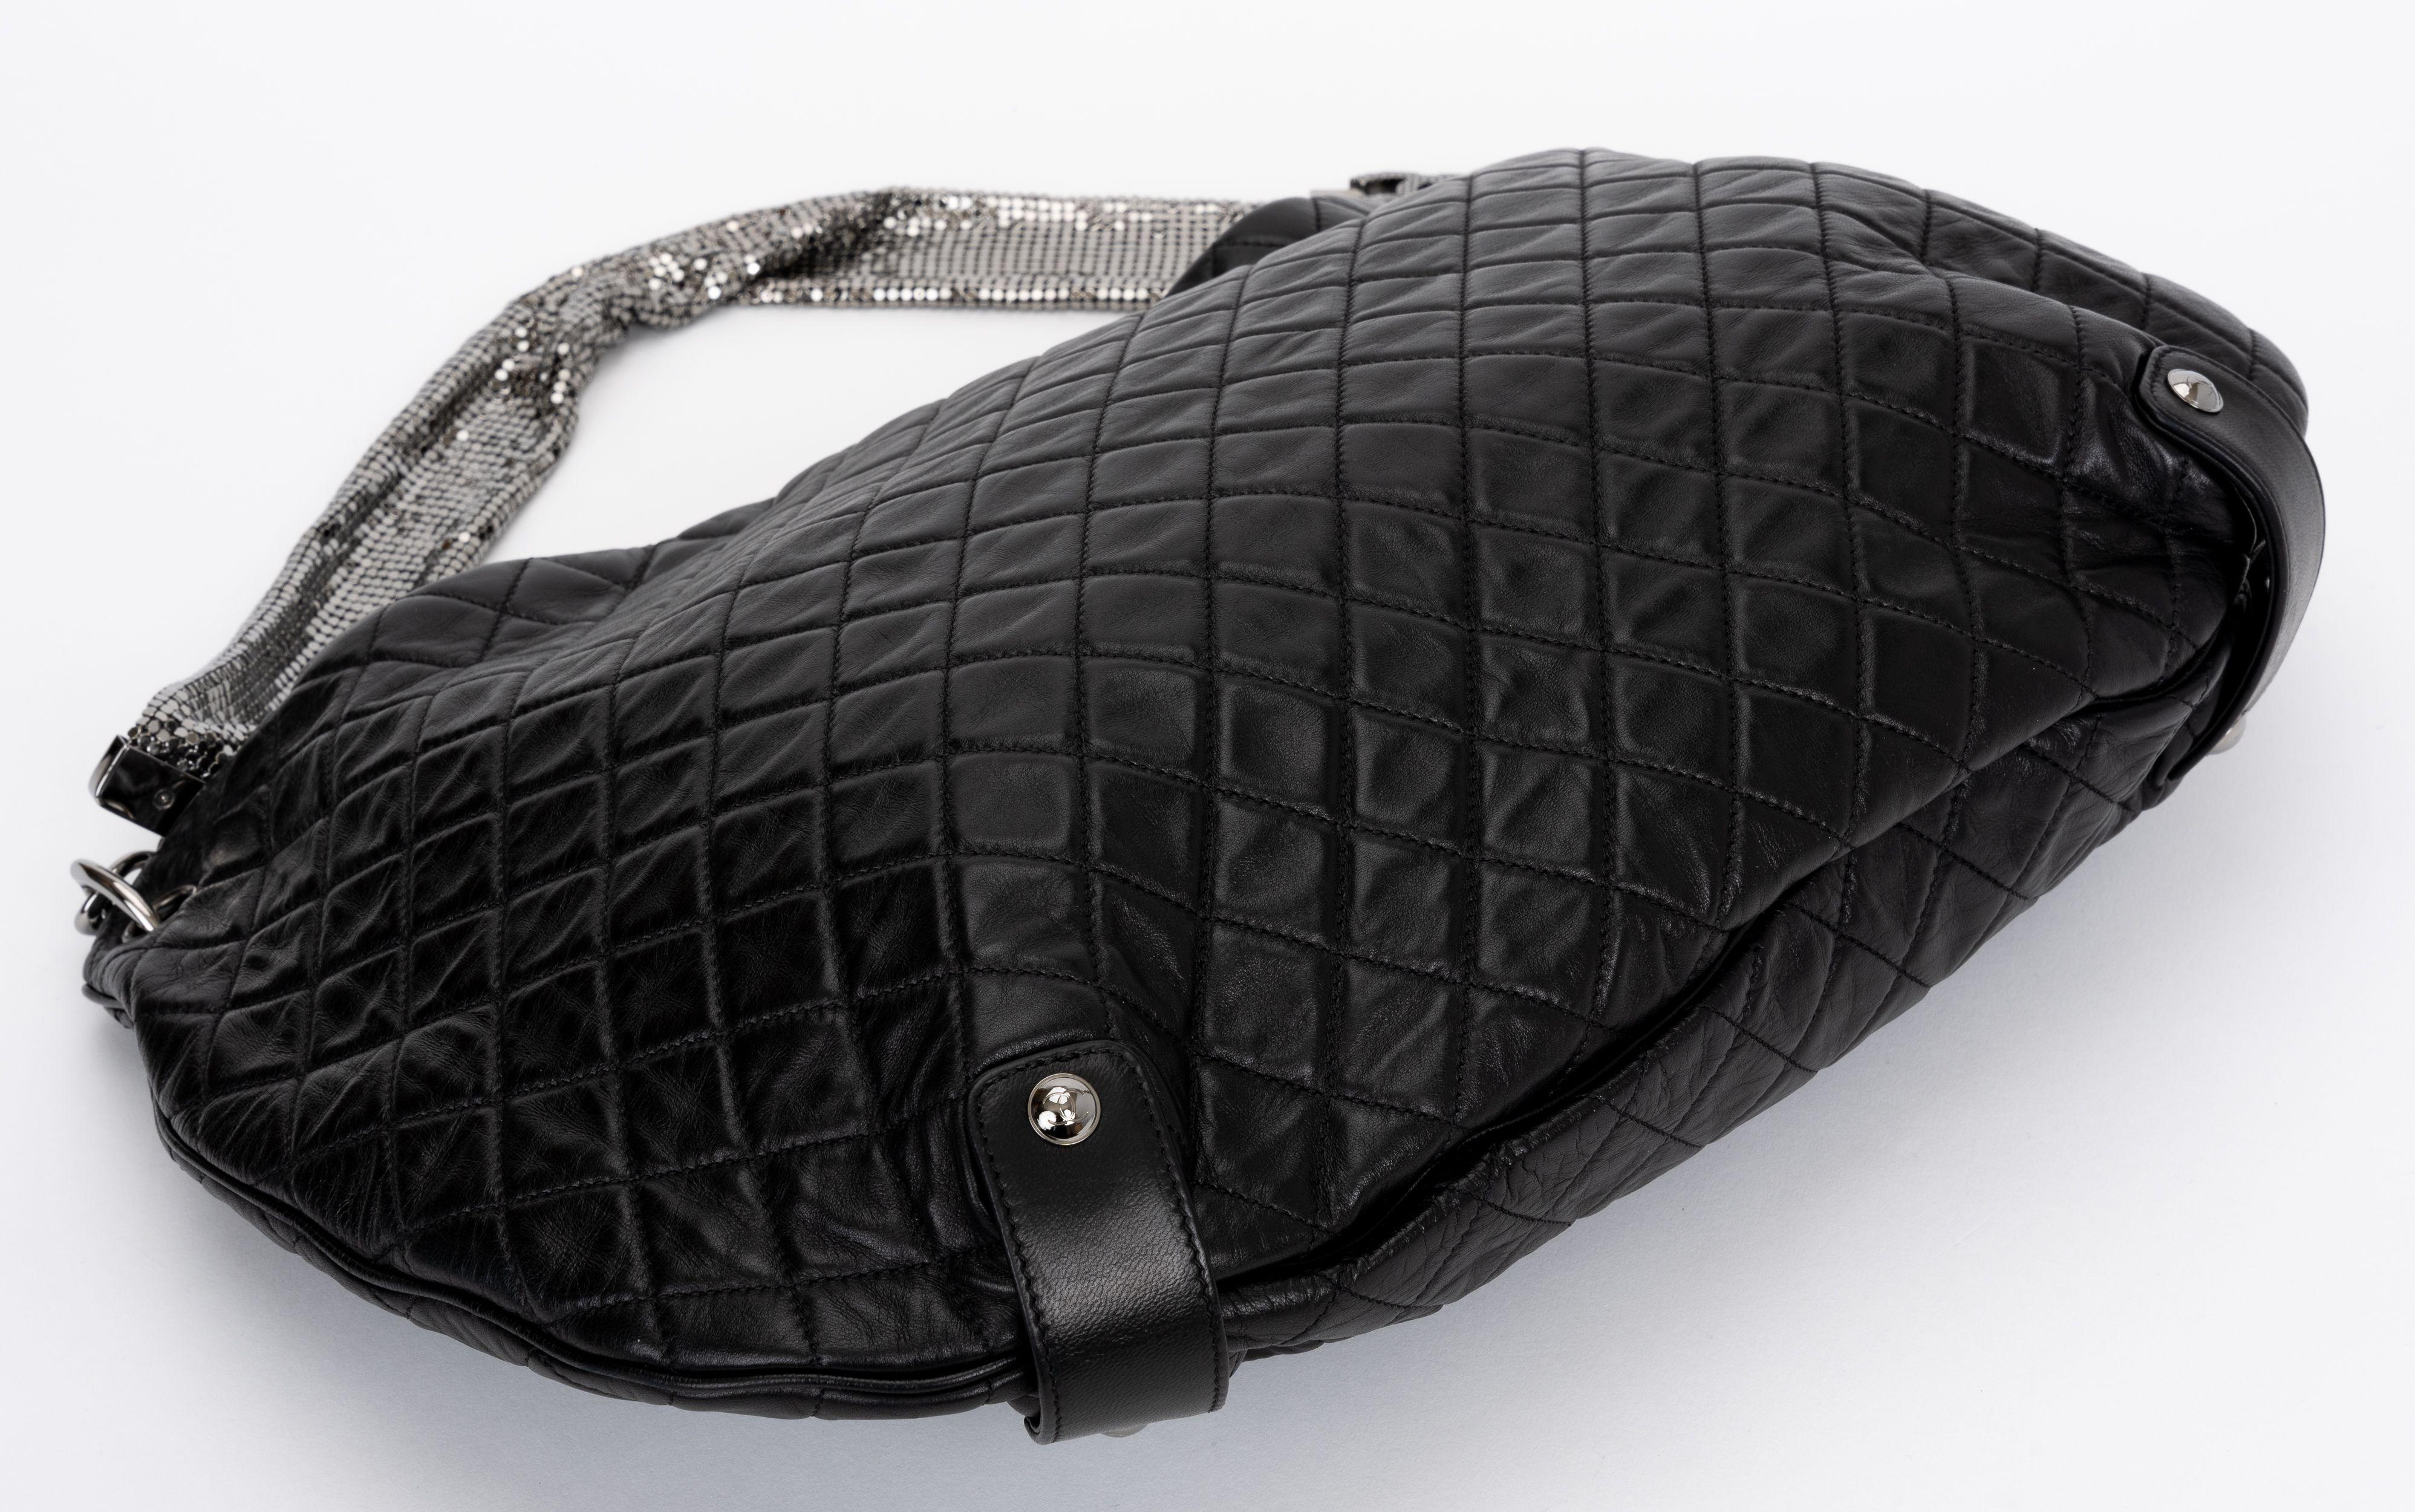 The Chanel Black Quilted Lambskin Chain Mail Medium Hobo Bag has a day and night slouchy design with a silver mesh strap.
Shoulder drop 9